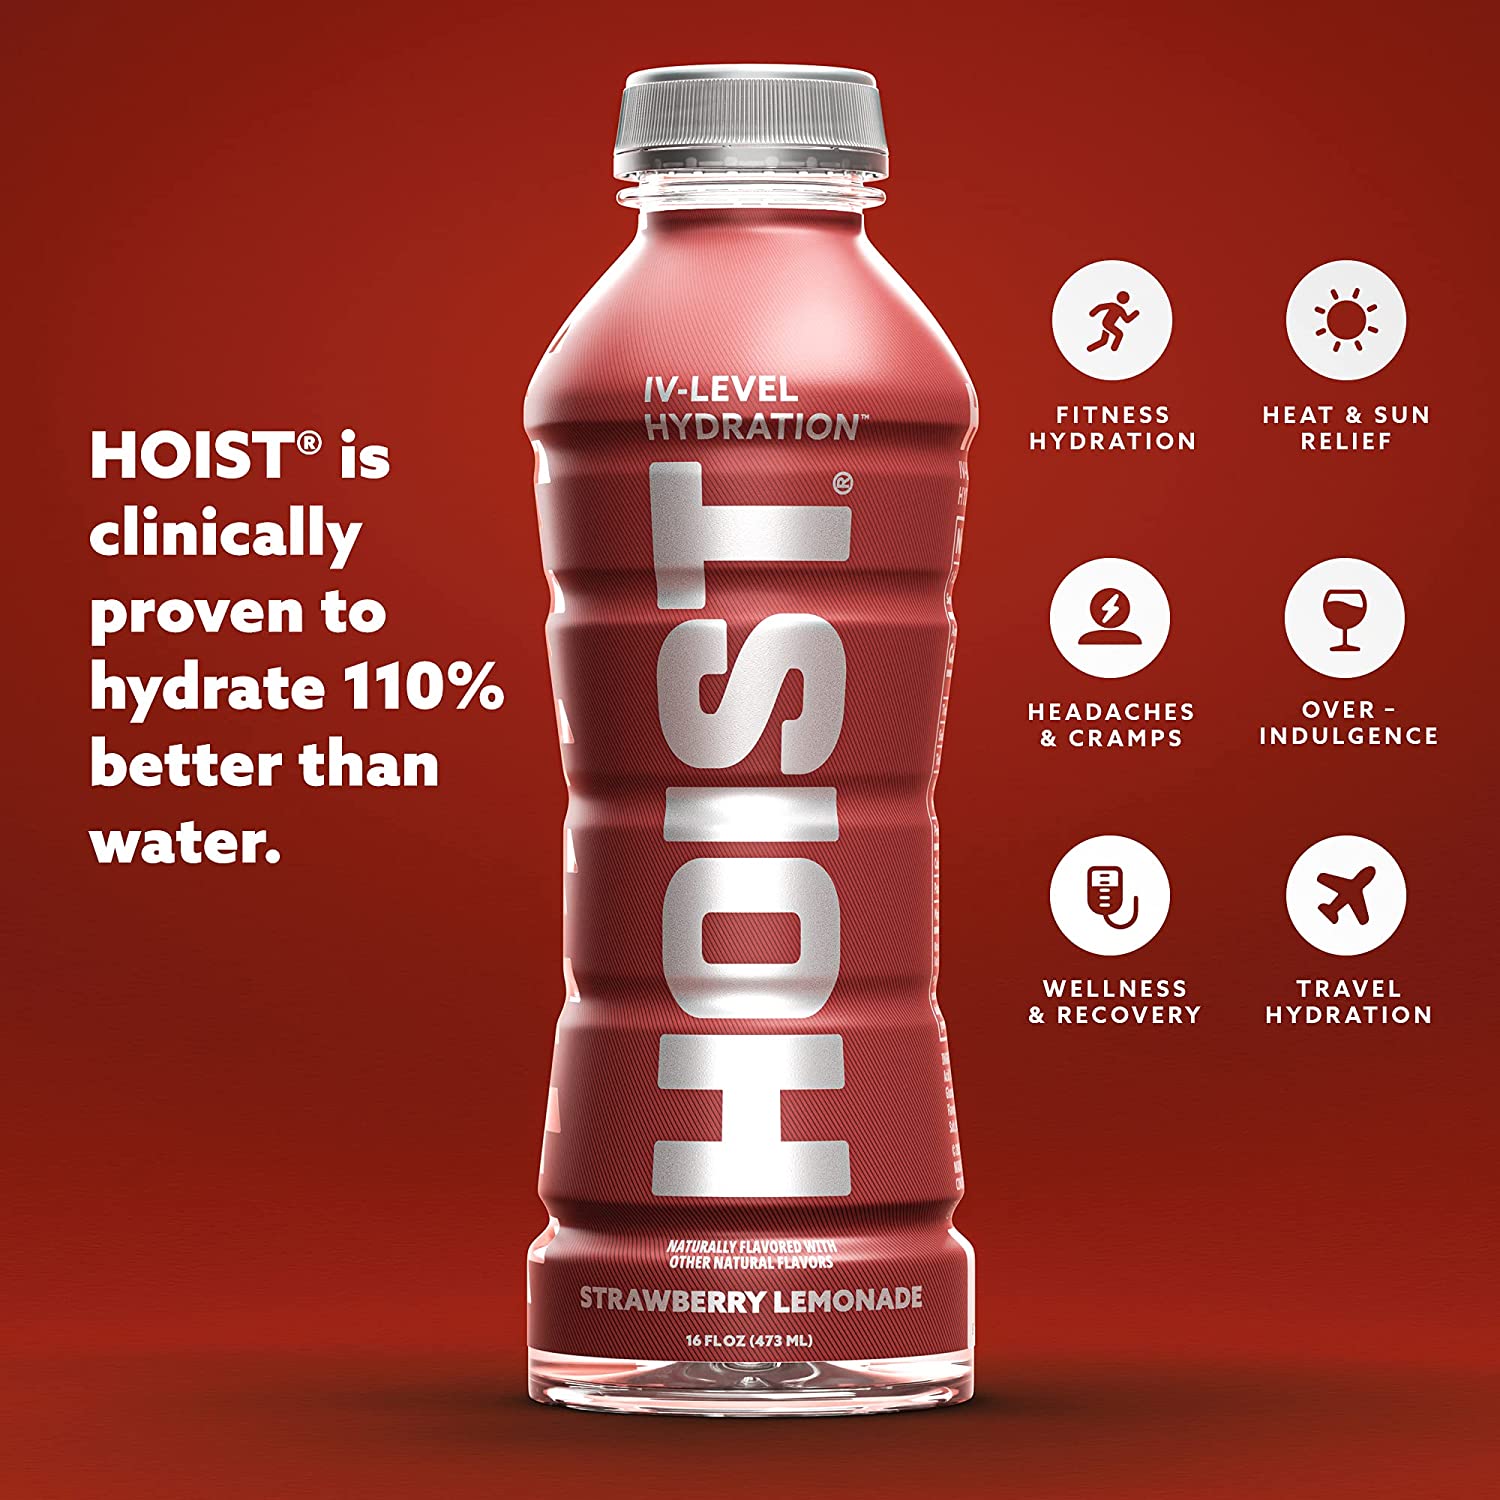 Hydrating recovery drinks